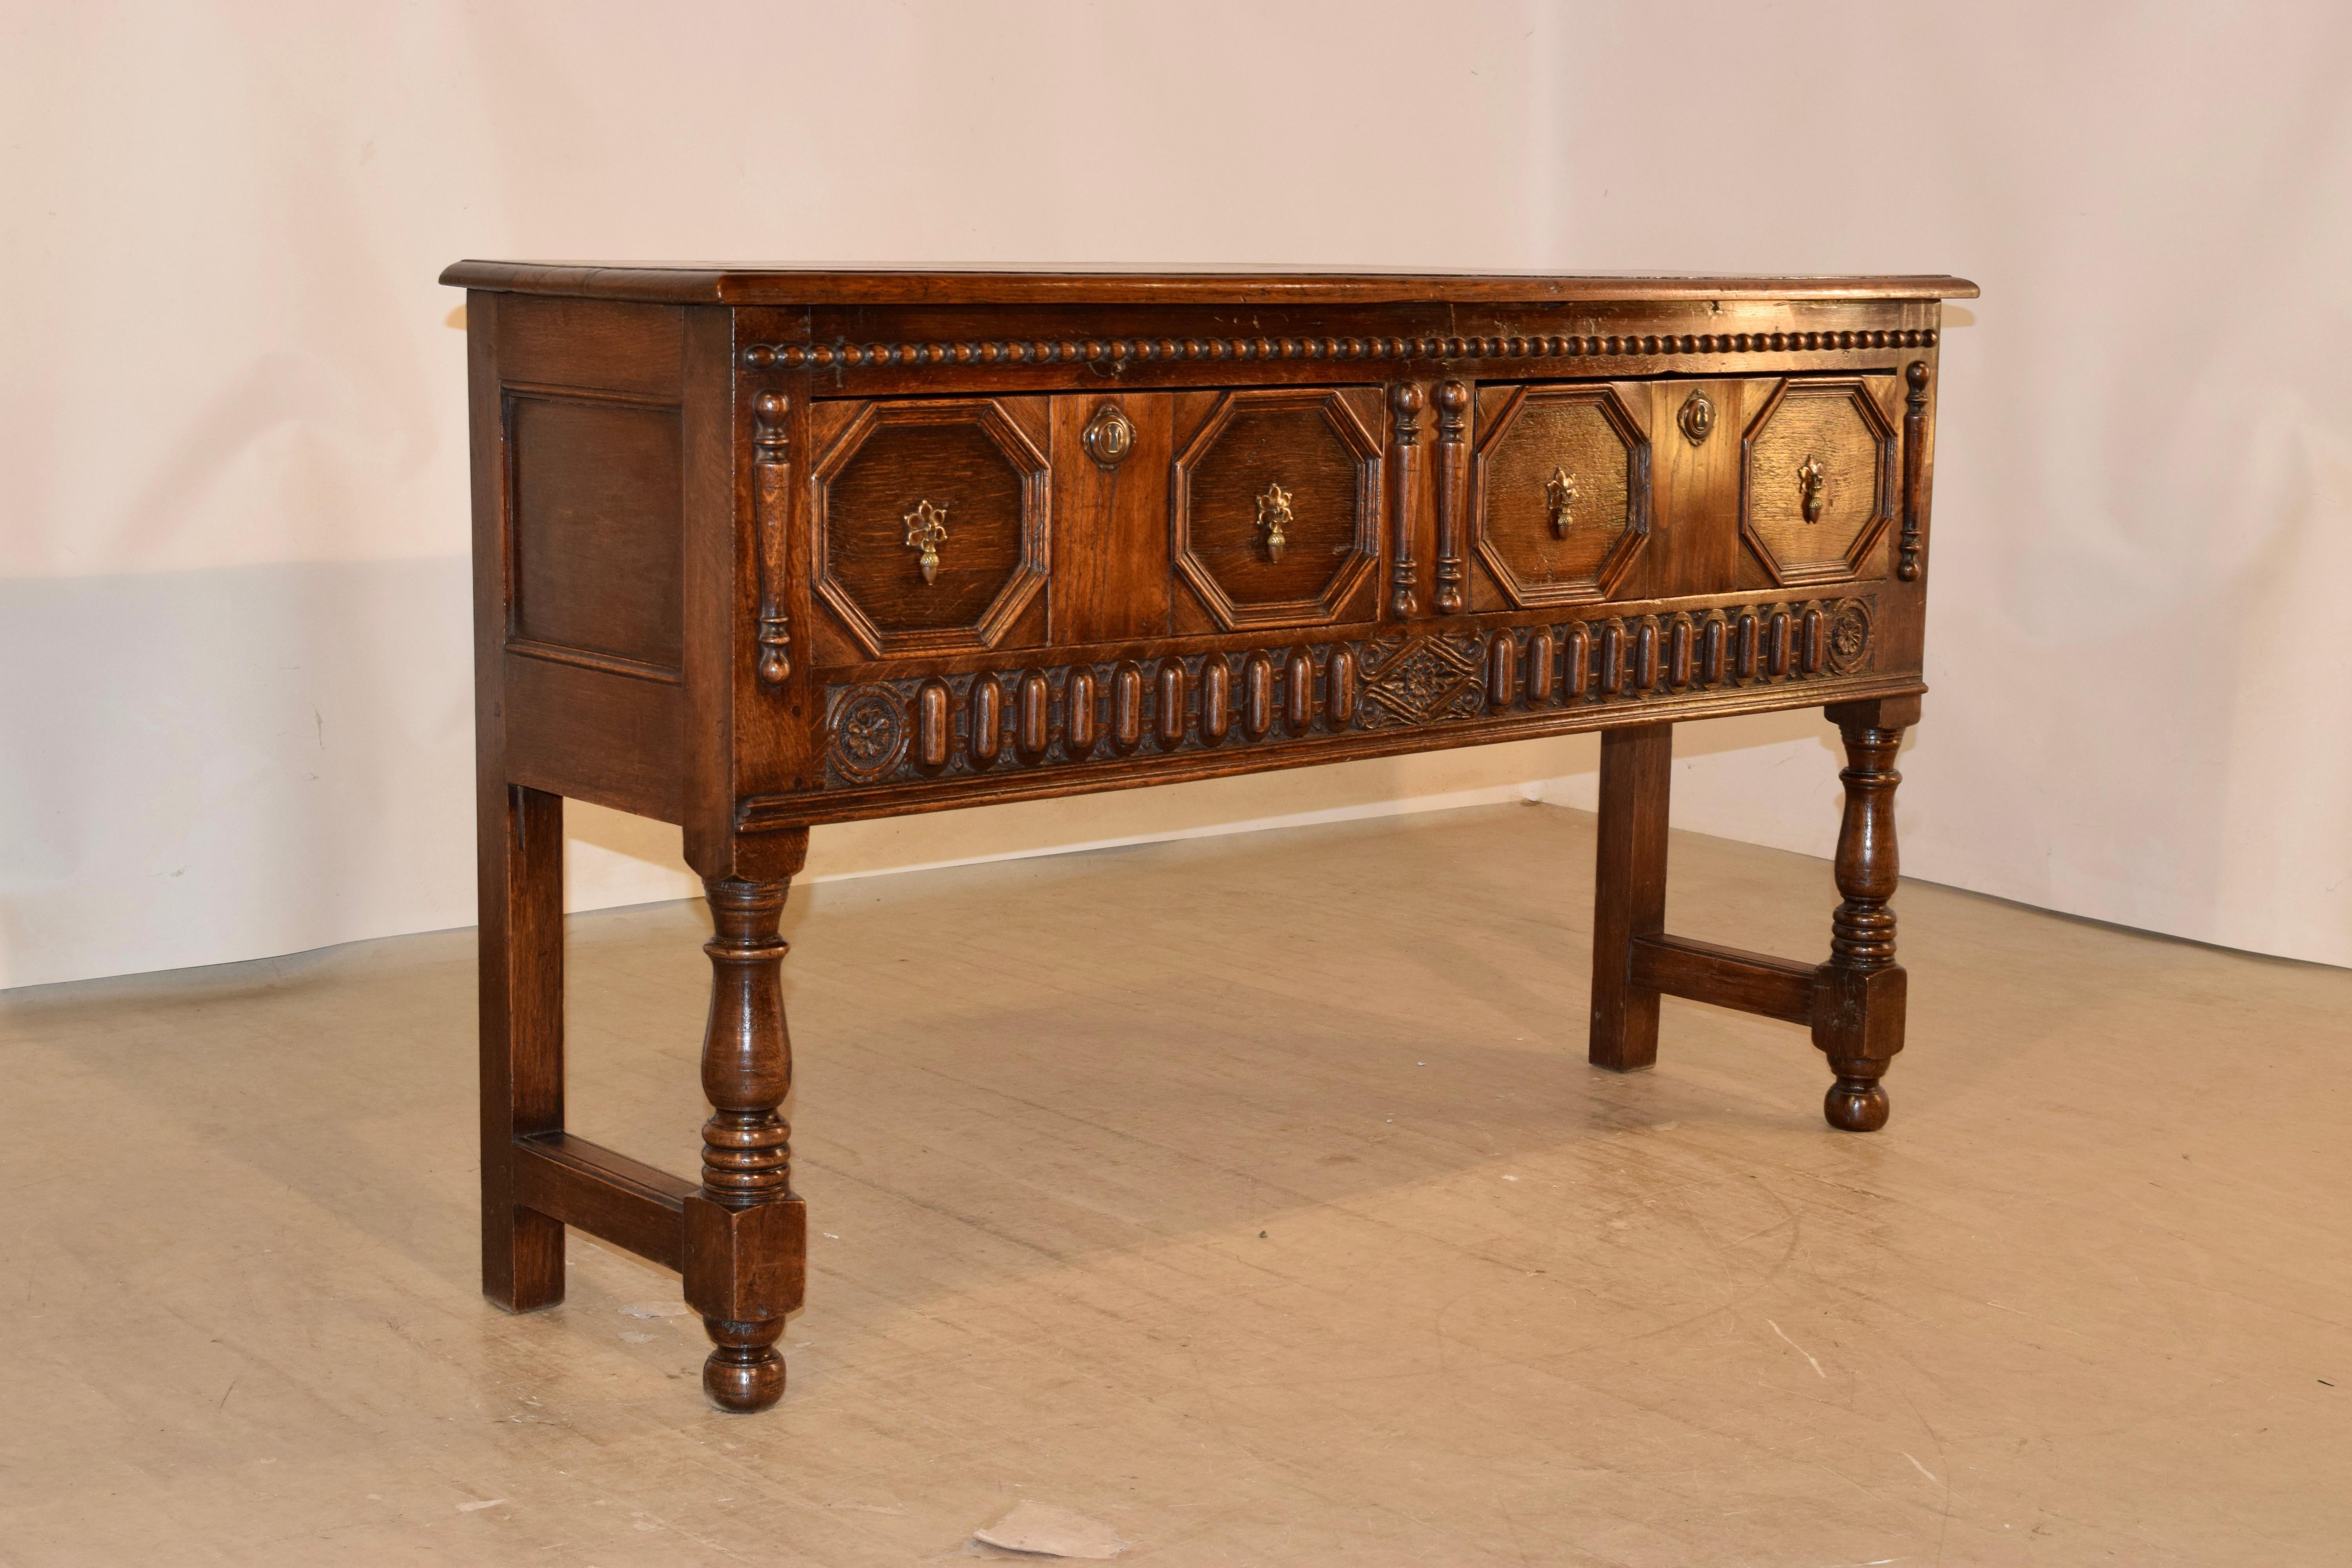 19th century oak sideboard from England with a beveled edge around the top, following down to paneled sides and two drawers in the front with raised geometric panels, flanked by hand-turned applied moldings and a beaded molding across the top. The